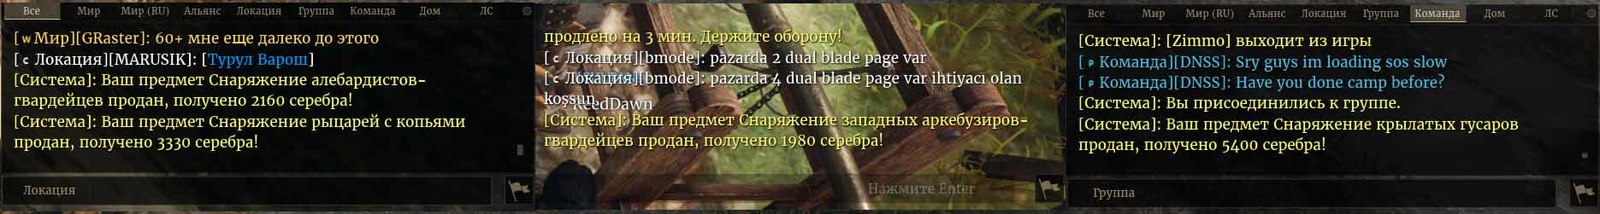 How to get rich in Conqueror's Blade? - My, Computer games, Mount Blade II: Bannerlord, Mount and blade, Open world, Longpost, Conqueror’s Blade, Mount and Blade II: Bannerlord